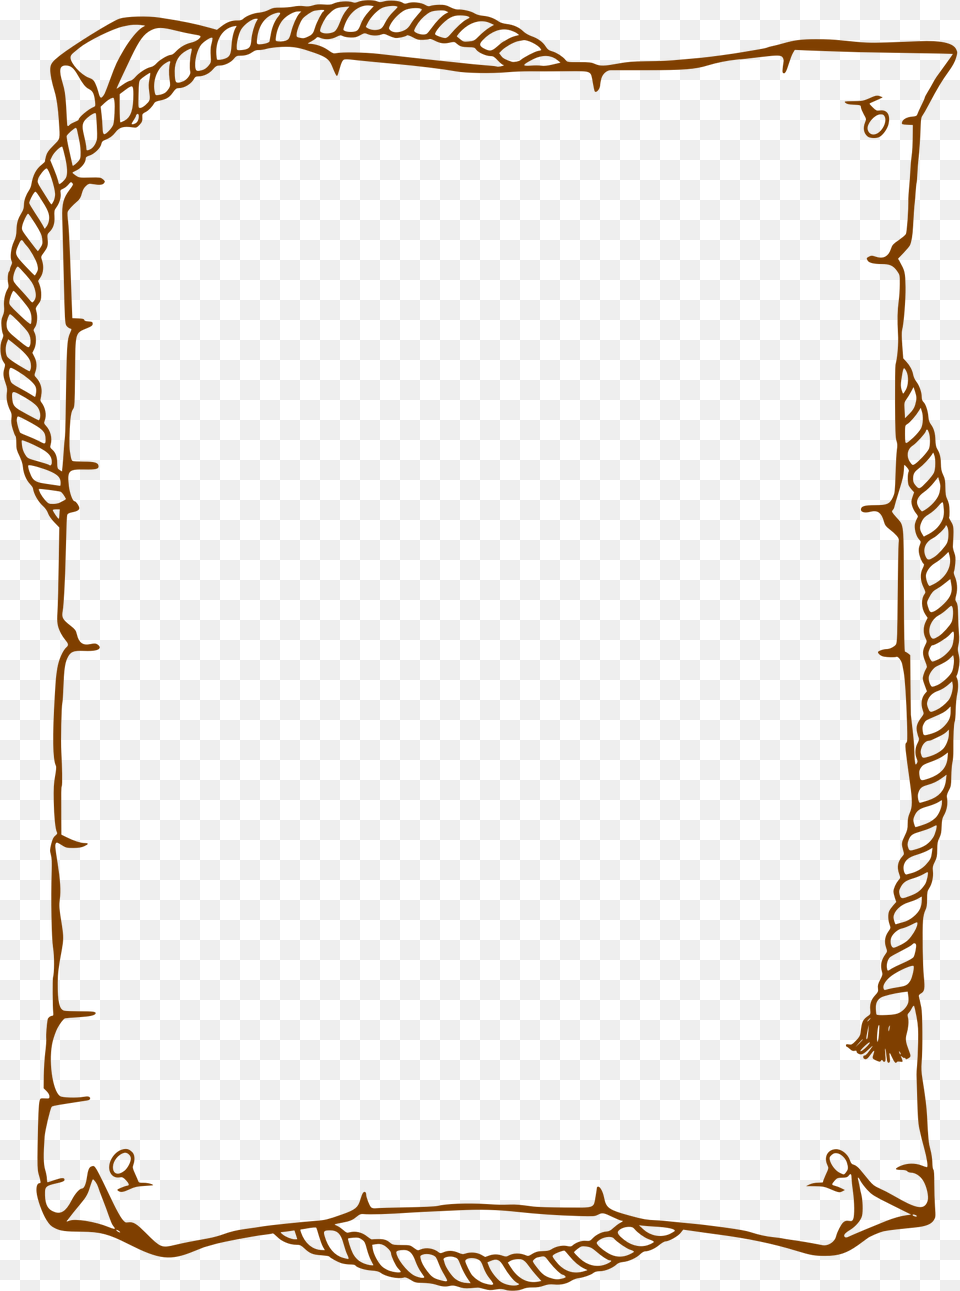 Rope Clipart Wild West Border Clip Art, Text, Home Decor Png